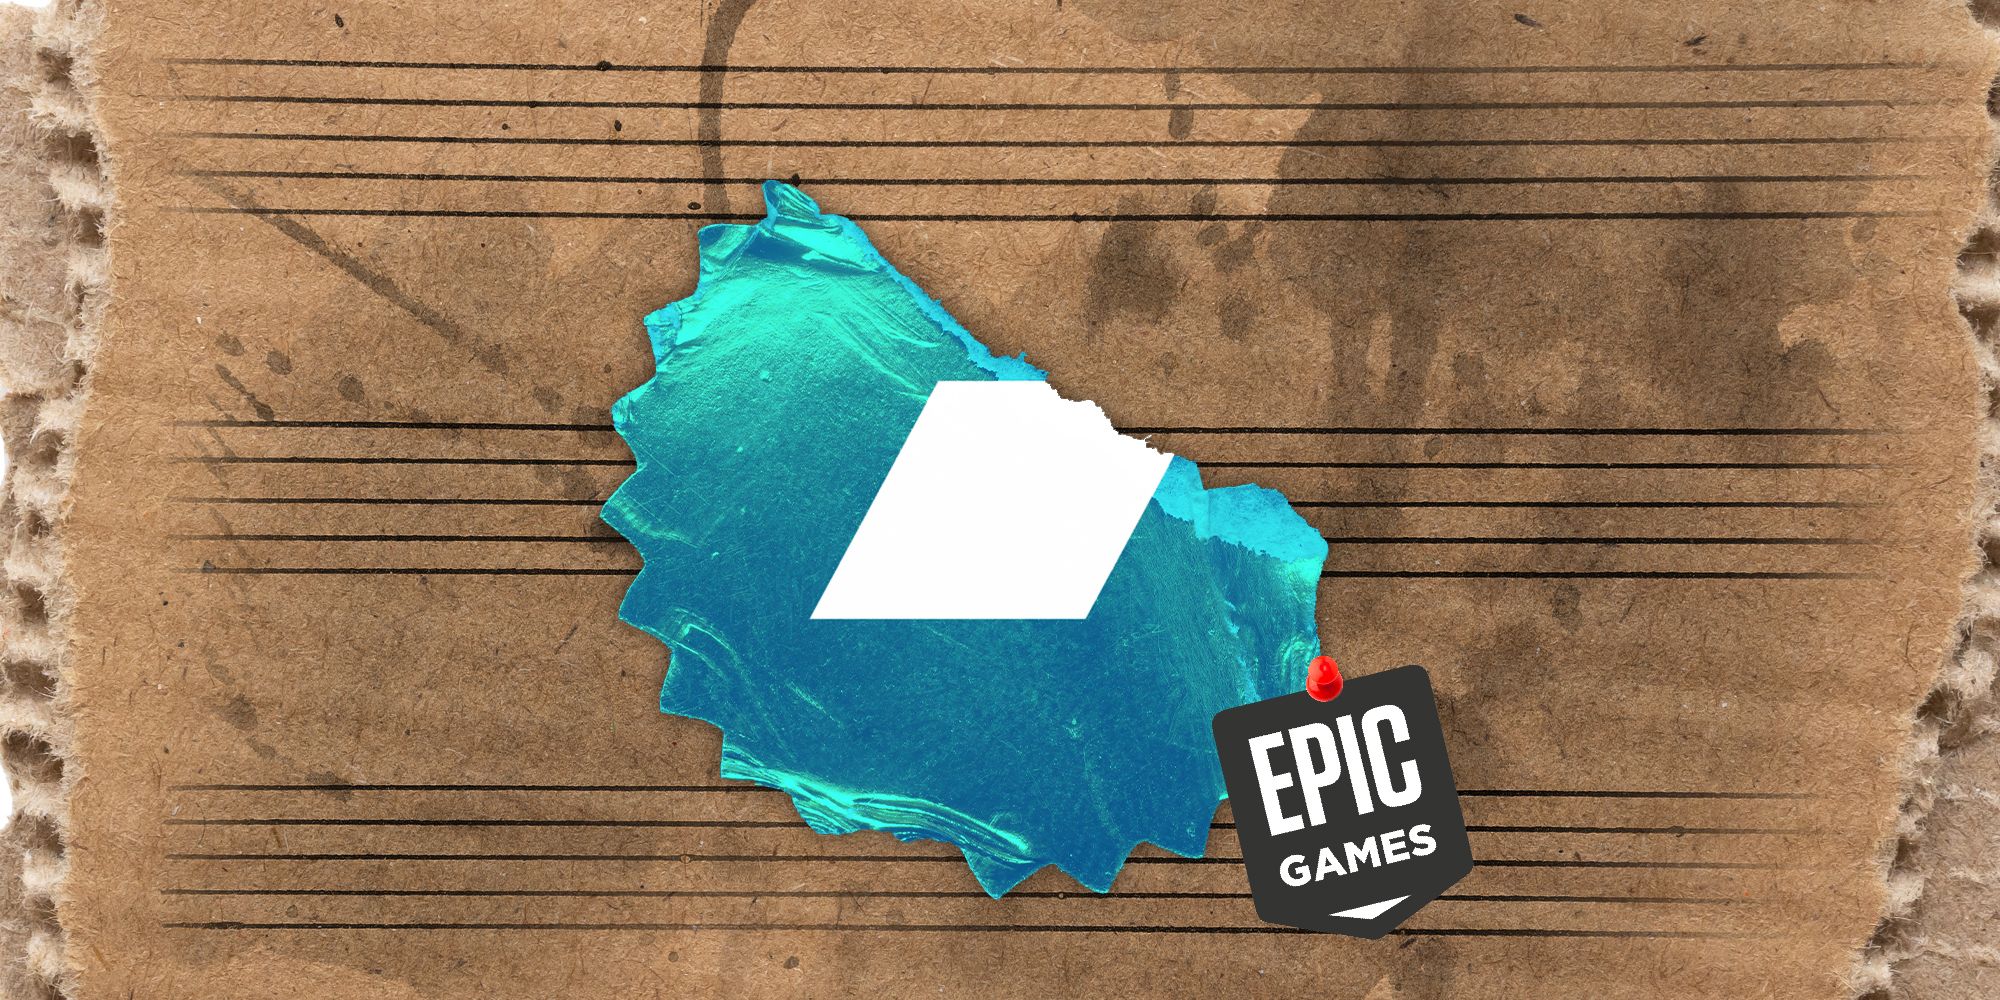 Epic Games is eliminating 16% of its workforce and selling Bandcamp